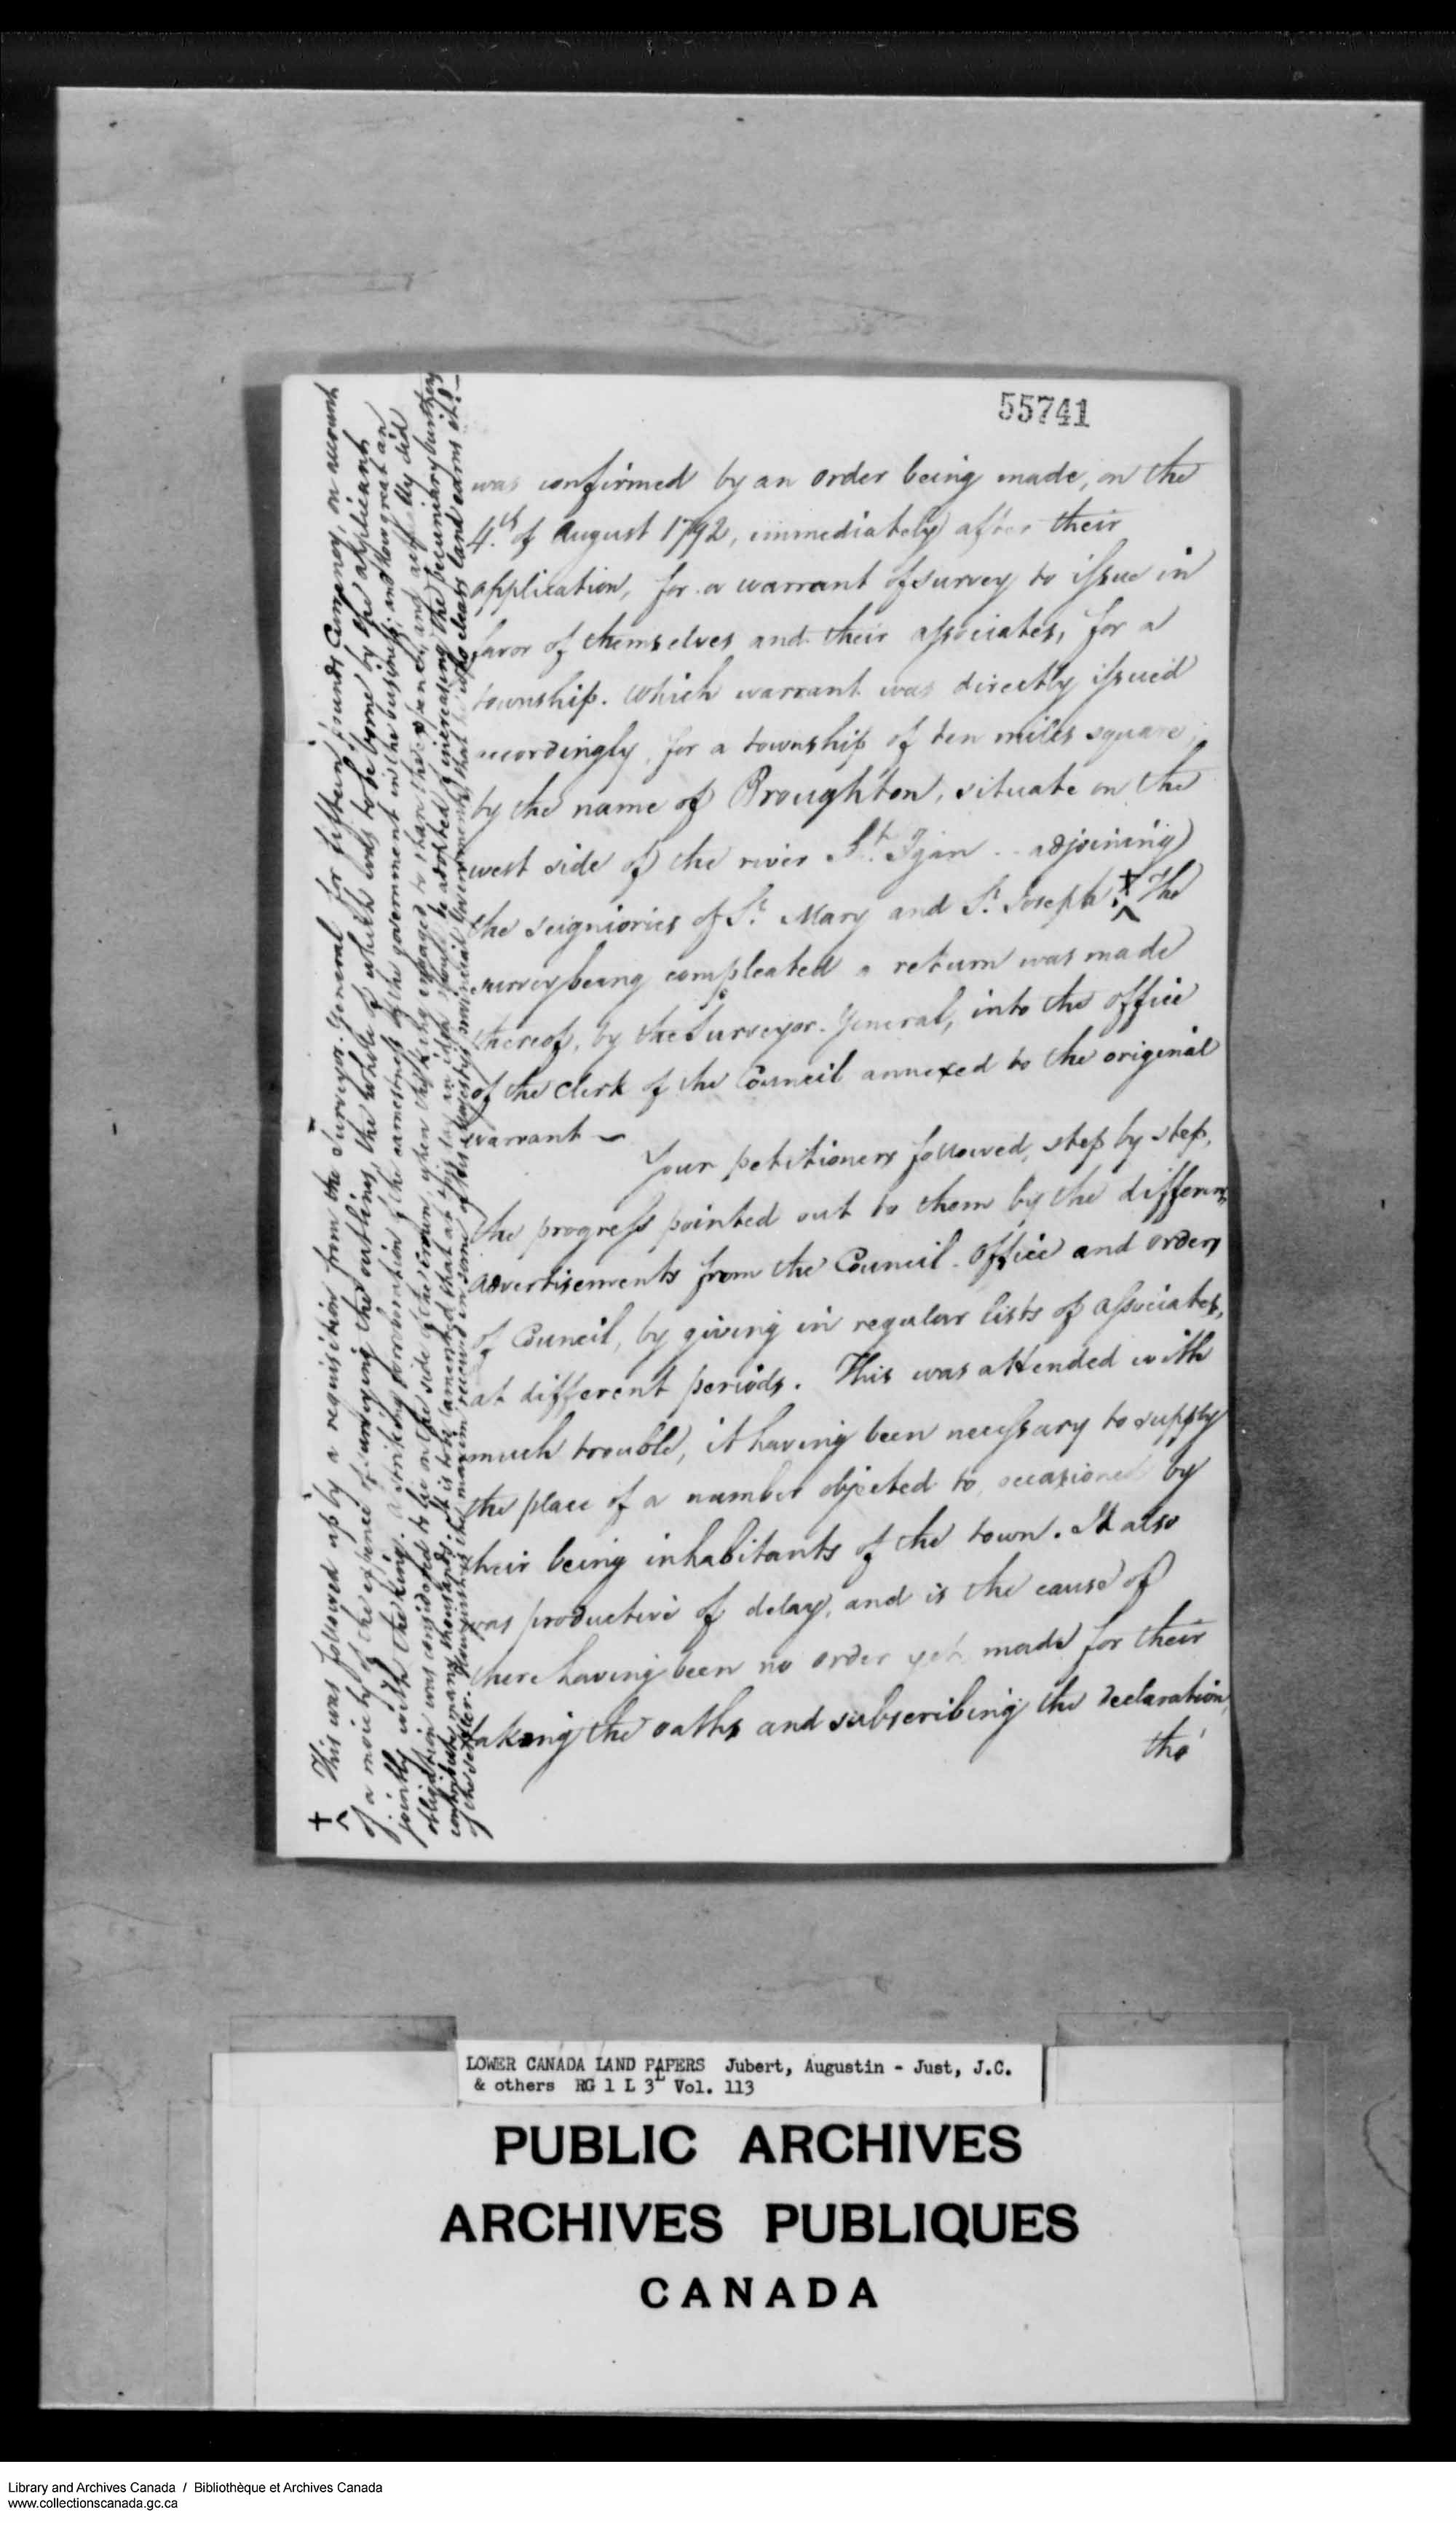 Digitized page of  for Image No.: e008700229